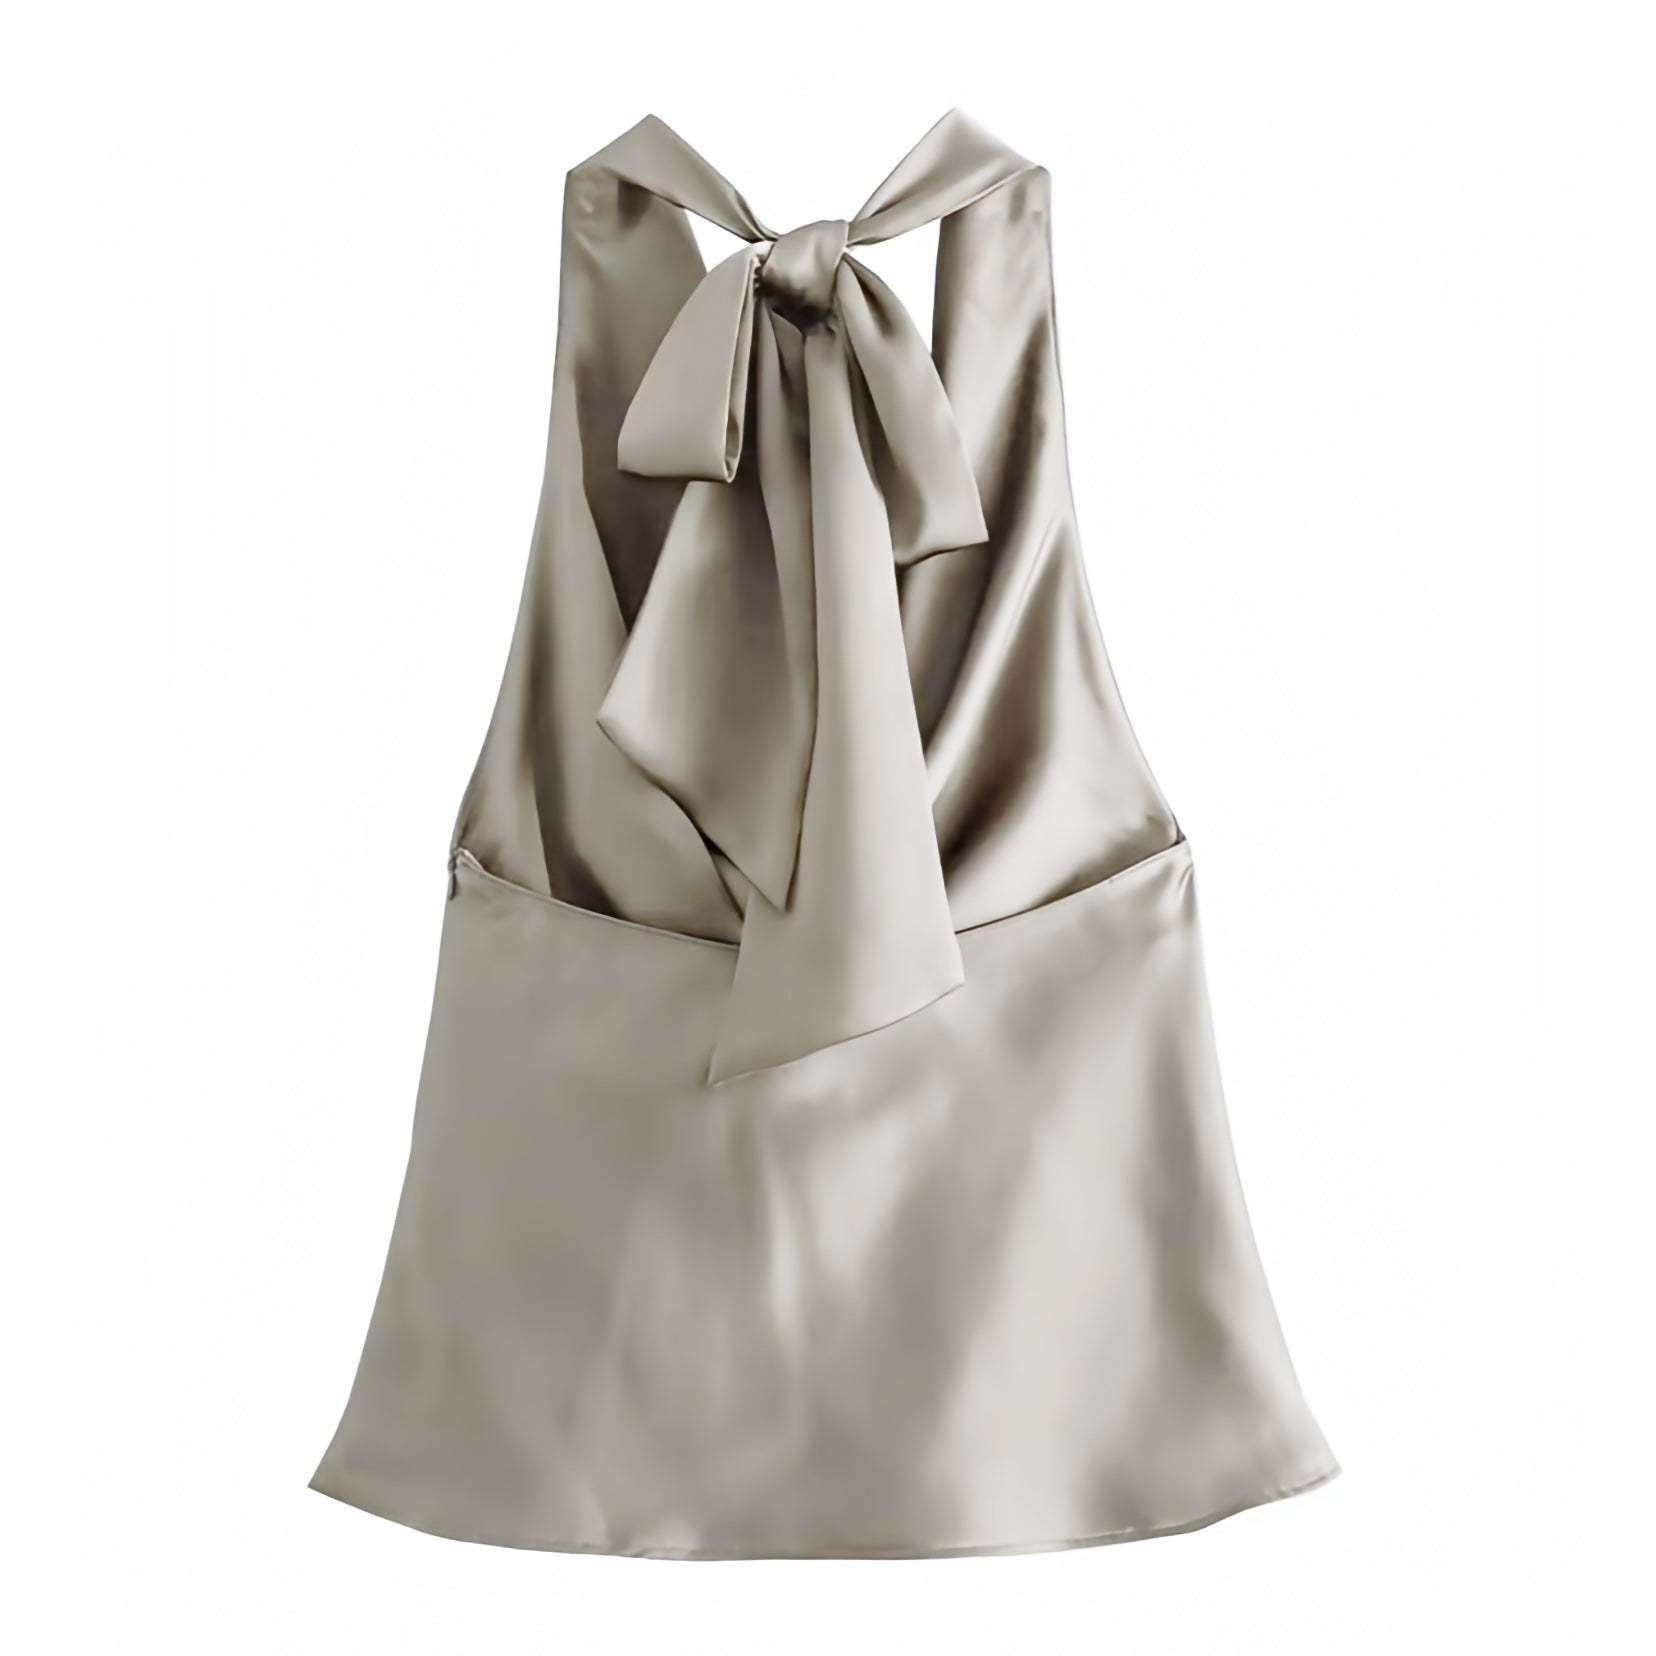 light-beige-khaki-tan-satin-silk-draped-ruched-scoop-neck-slim-fit-backless-open-back-cut-out-sleeveless-halter-crop-camisole-tank-top-blouse-women-ladies-chic-trendy-spring-2024-summer-elegant-casual-semi-formal-classy-feminine-party-date-night-out-sexy-club-wear-90s-minimalist-office-siren-style-zara-revolve-aritzia-white-fox-princess-polly-babyboo-iamgia-edikted-fenity